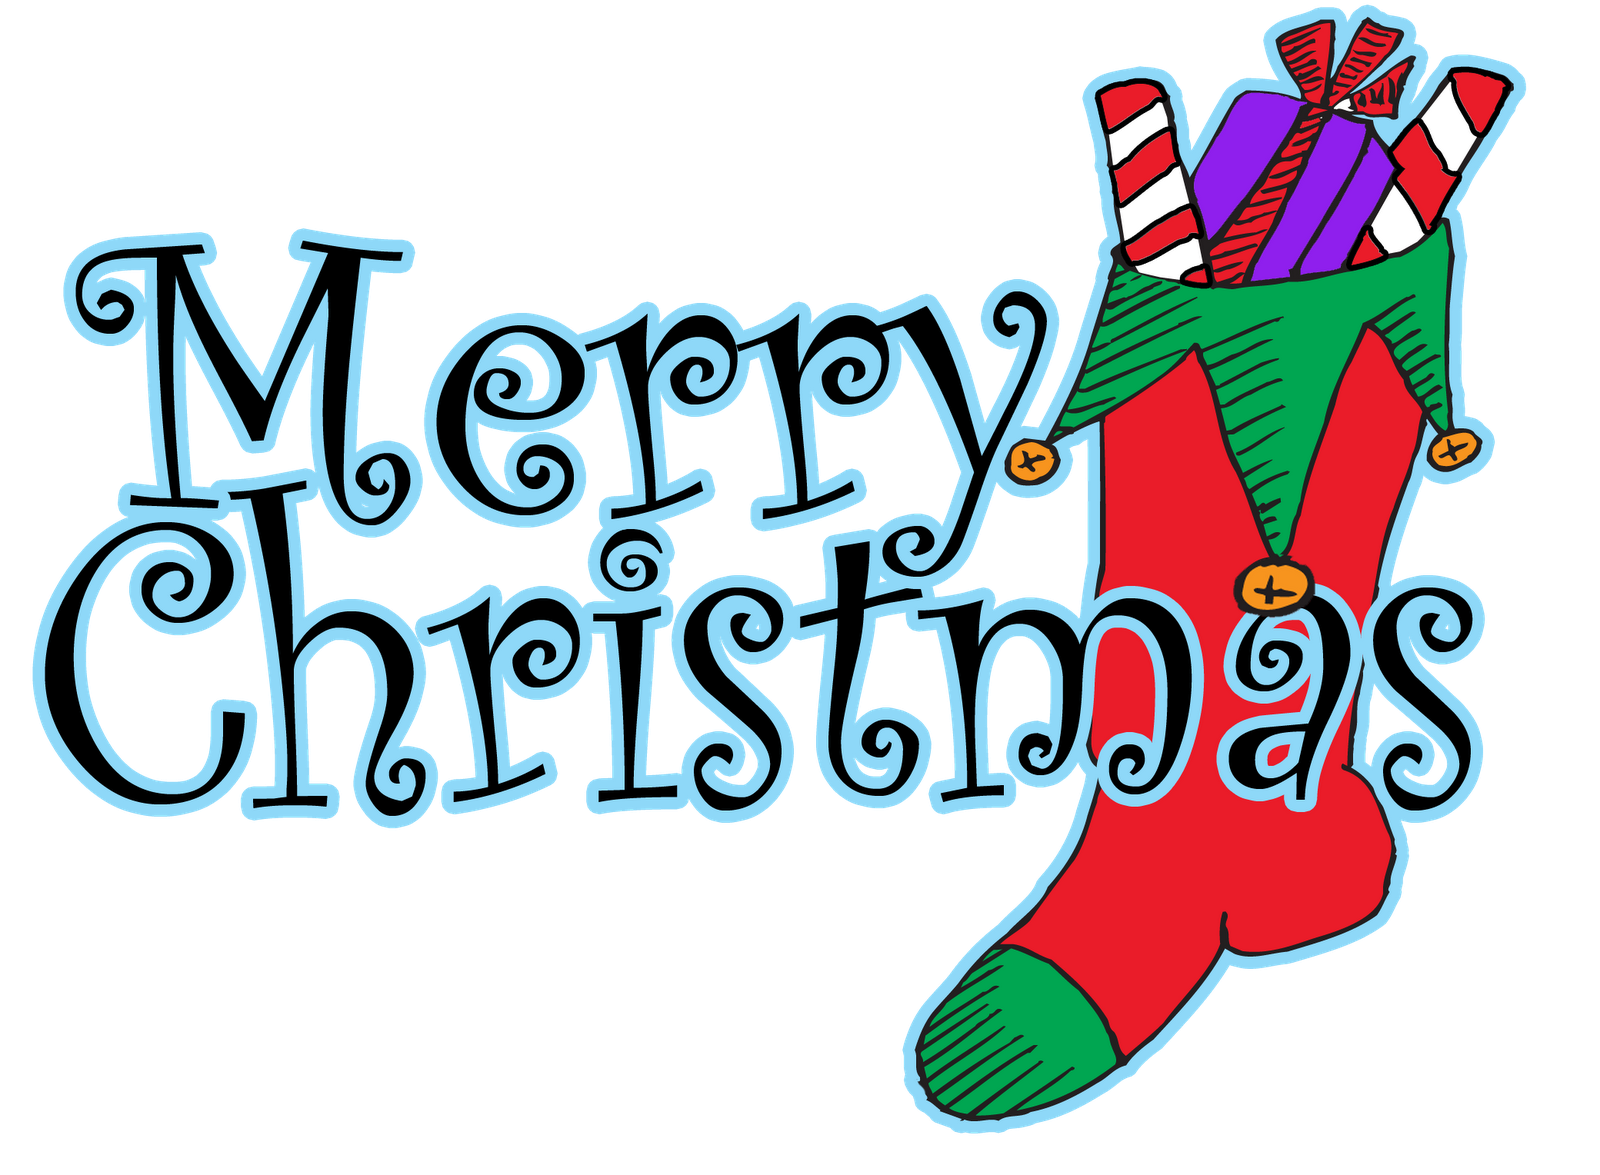 Merry christmas clip art words | HD Wallpaper and Download- HappyFriday PNG HD, Happy Friday PNG HD Free - Free PNG